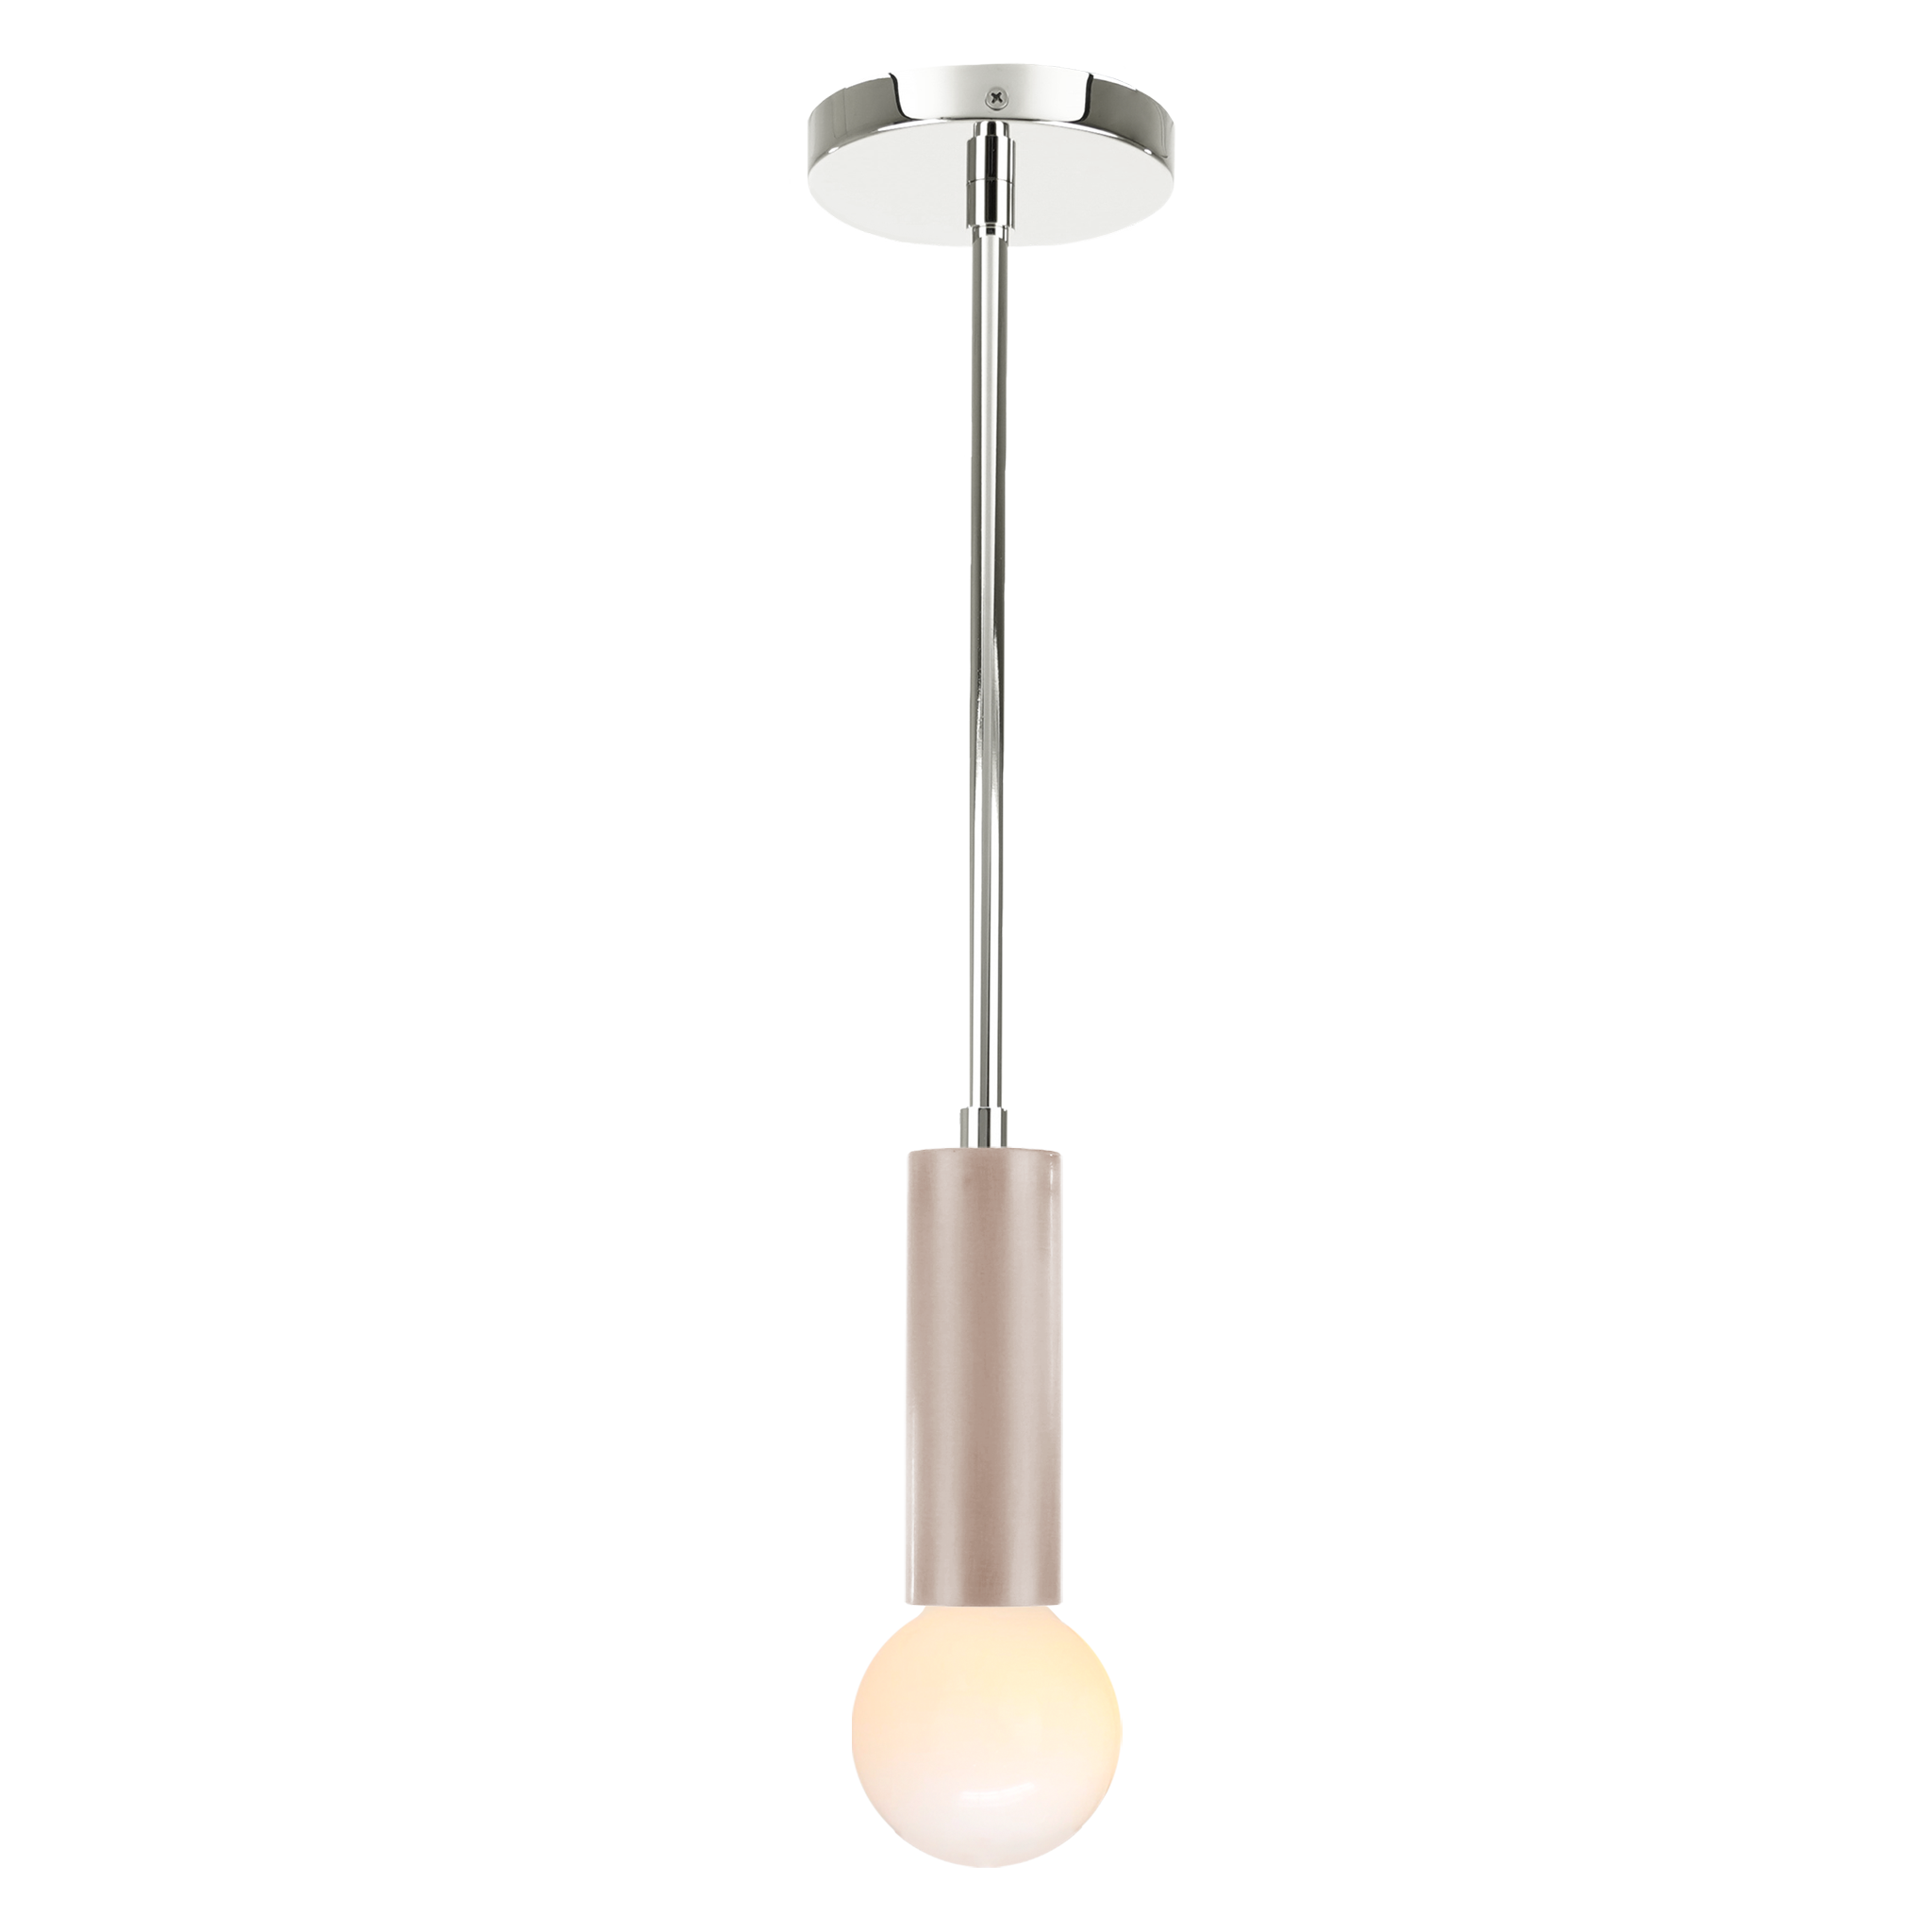 Nickel and barely color Eureka pendant Dutton Brown lighting